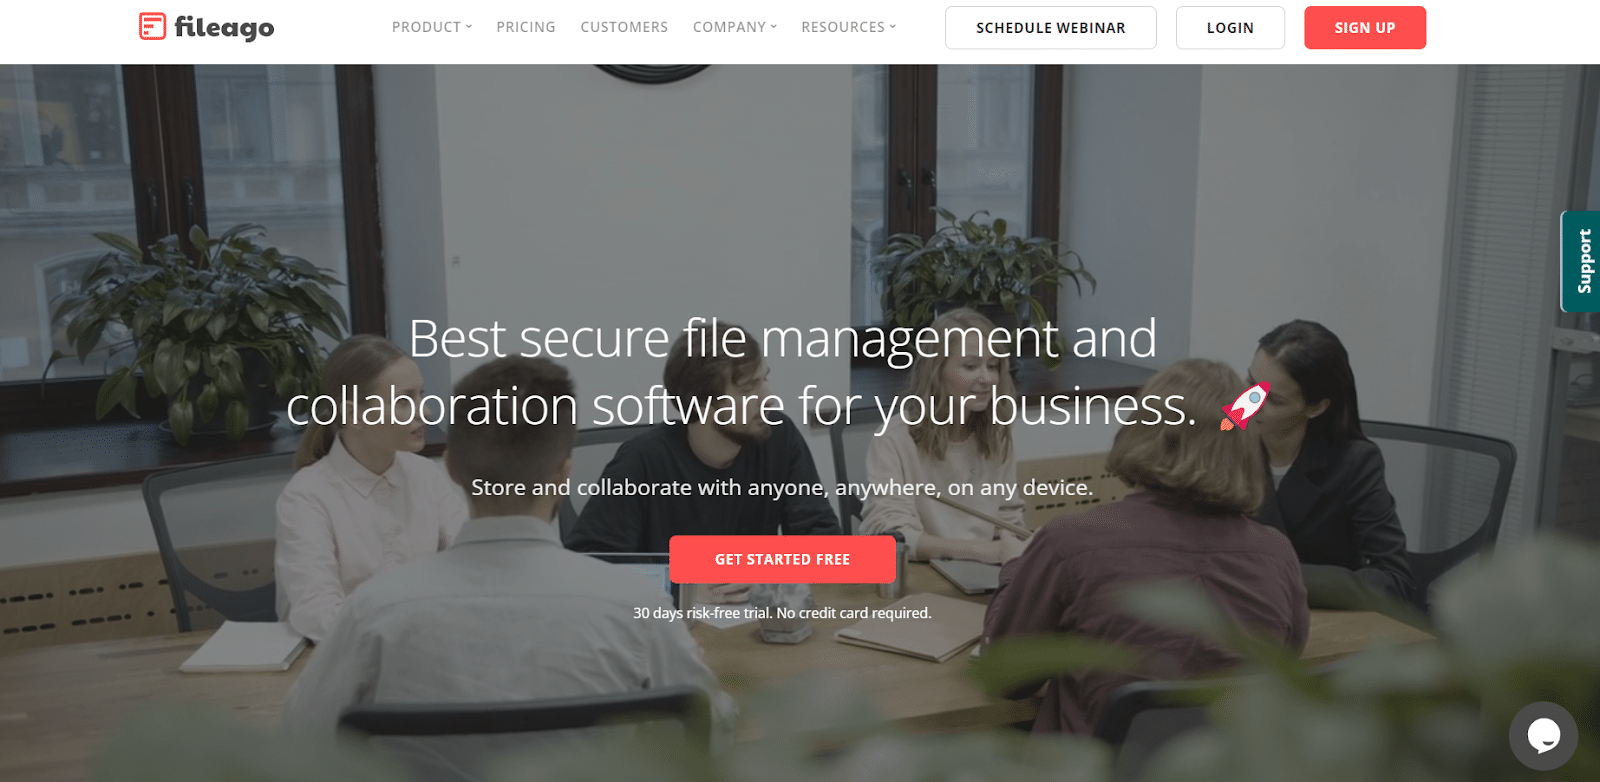 FileAgo File Management Software: A Powerful Solution For Businesses